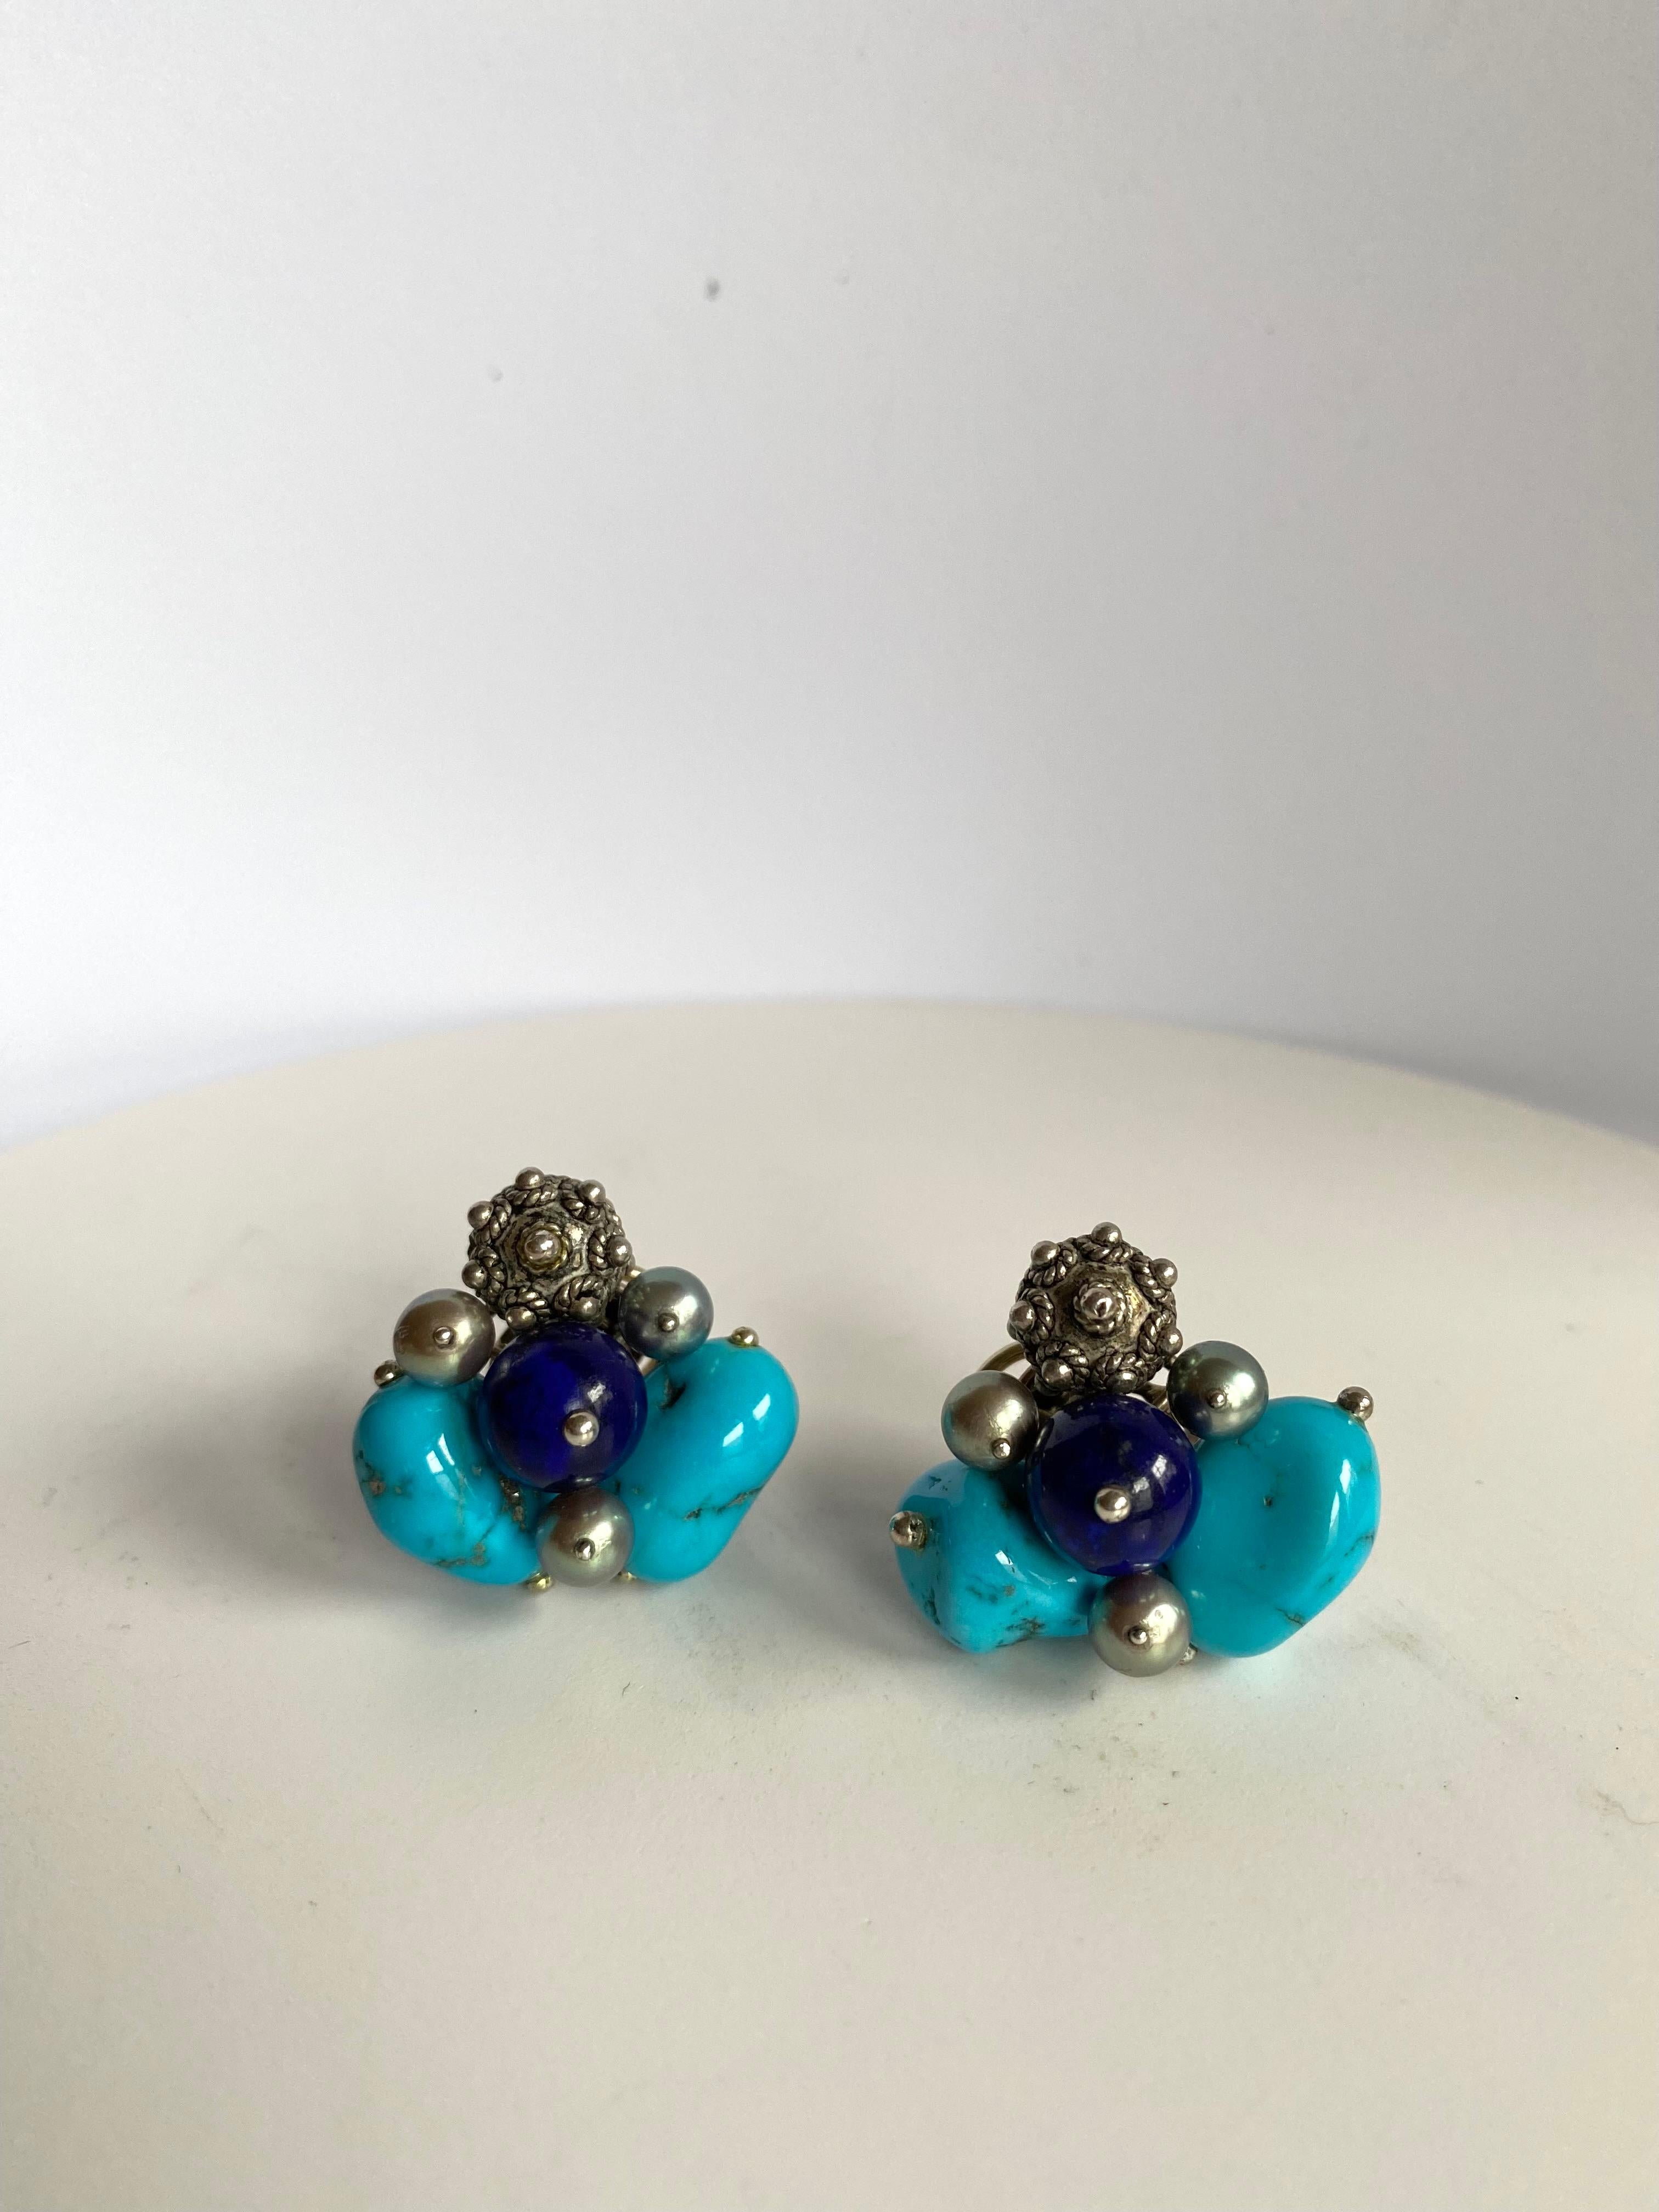 A cluster Earrings of natural Turquoise nuggets with granulated antique silver bead, lapis bead center and accents of gray pearls. Set in 18 karat white gold, signed Sorab & Roshi.

1